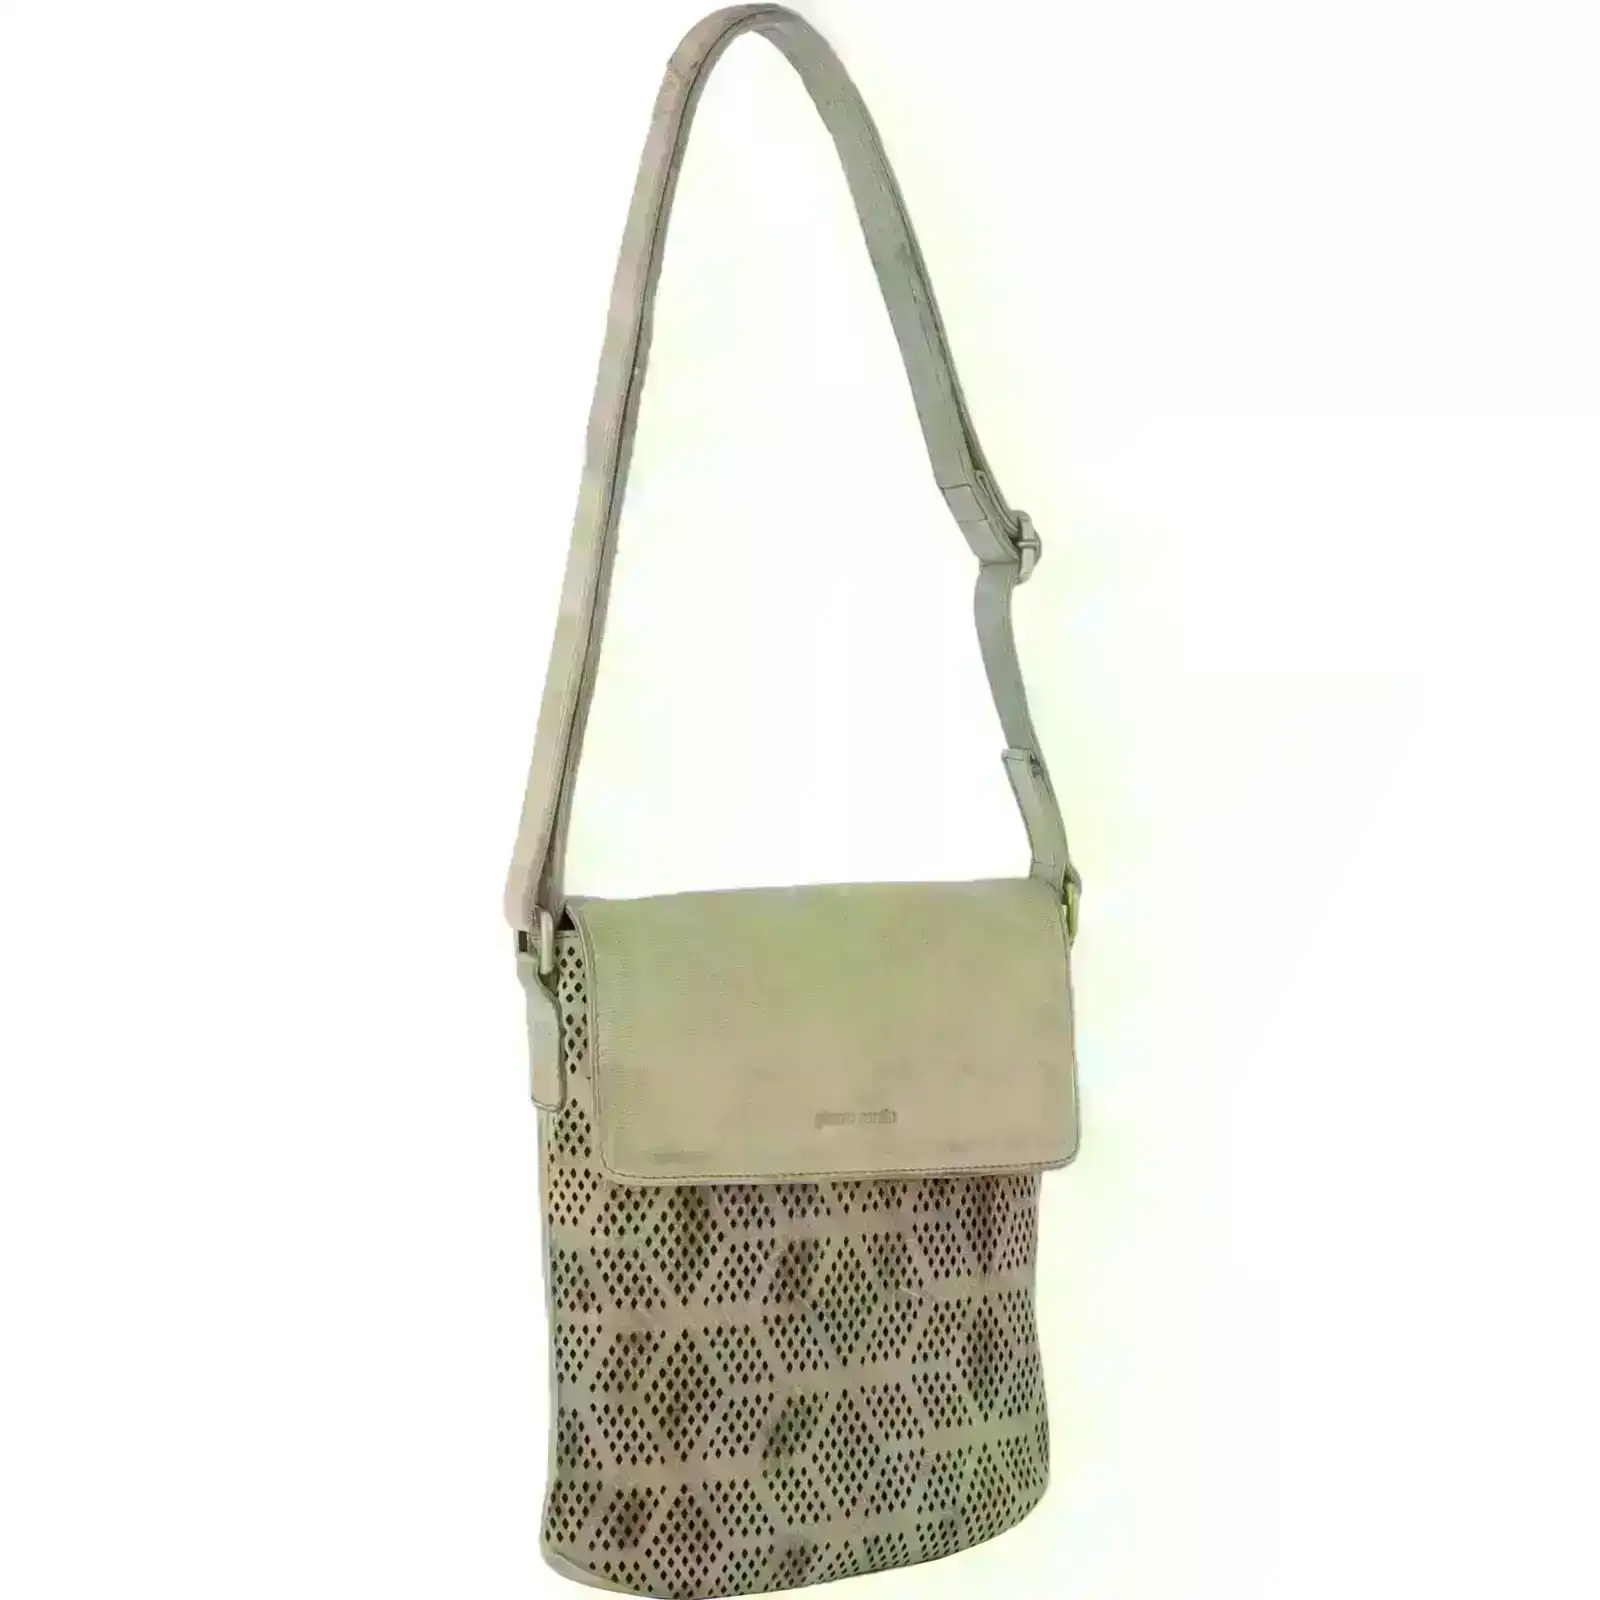 Pierre Cardin Leather Perforated Cross-Body Bag with Flap Closure - Latte